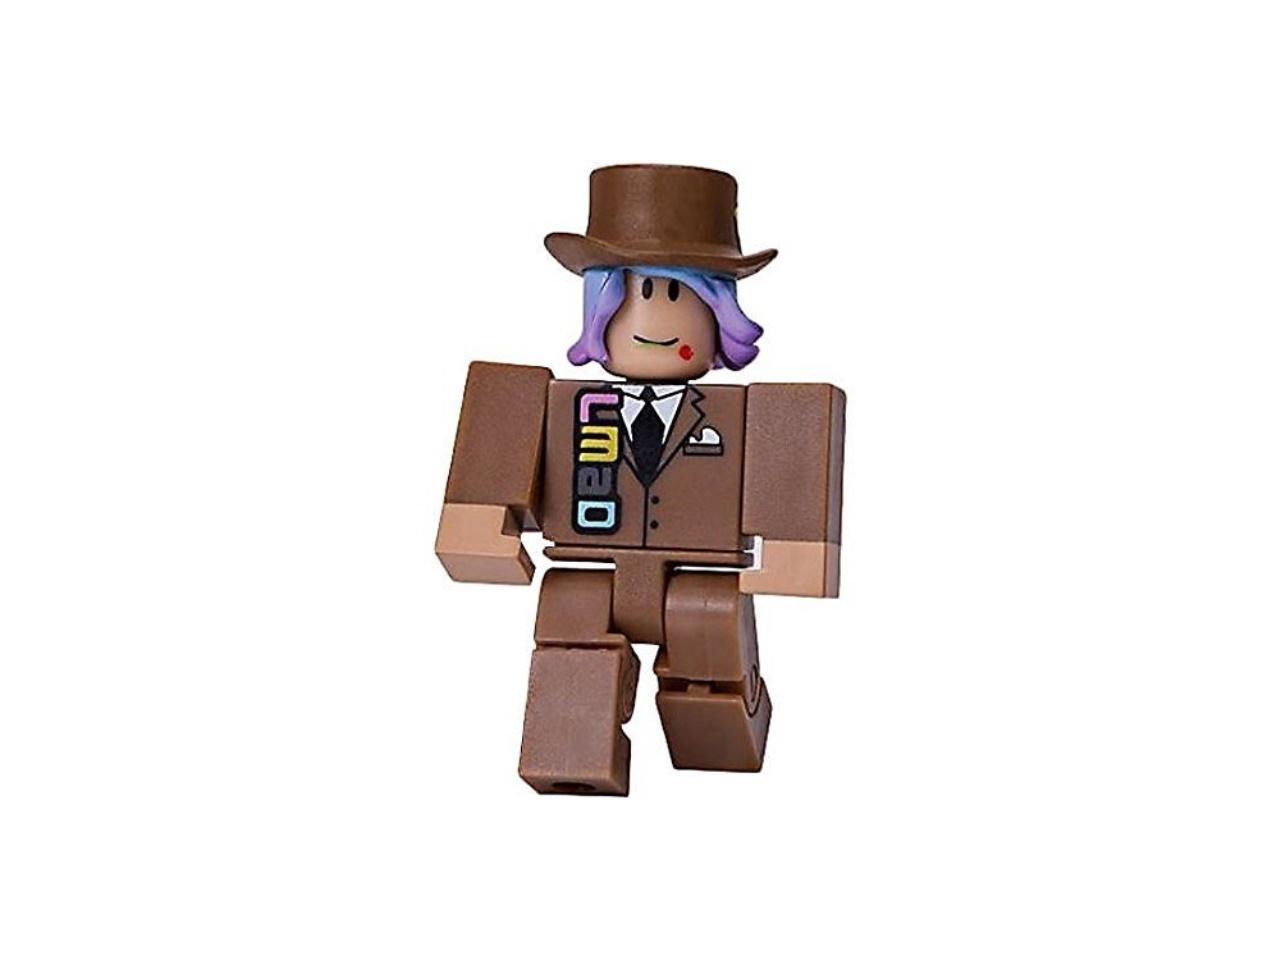 Roblox Series 1 Let S Make A Deal Action Figure Mystery Box Virtual Item Code 2 5 Newegg Com - code to shelter in roblox site 61